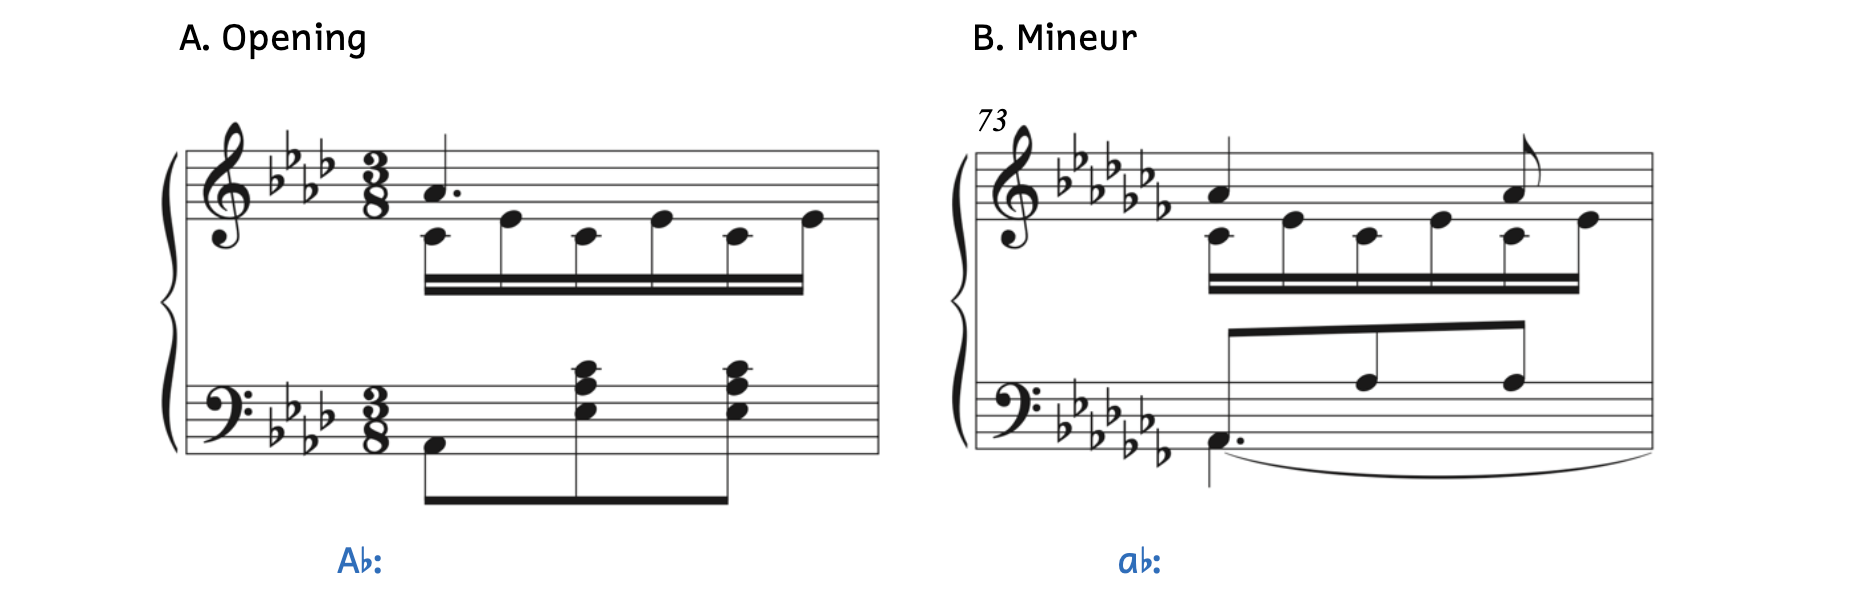 Parallel keys in Szymanowska's, Dances for Piano, Cotillon. Example A begins in A-flat major. The same melody returns in Example B, which is the parallel minor key of A-flat minor.